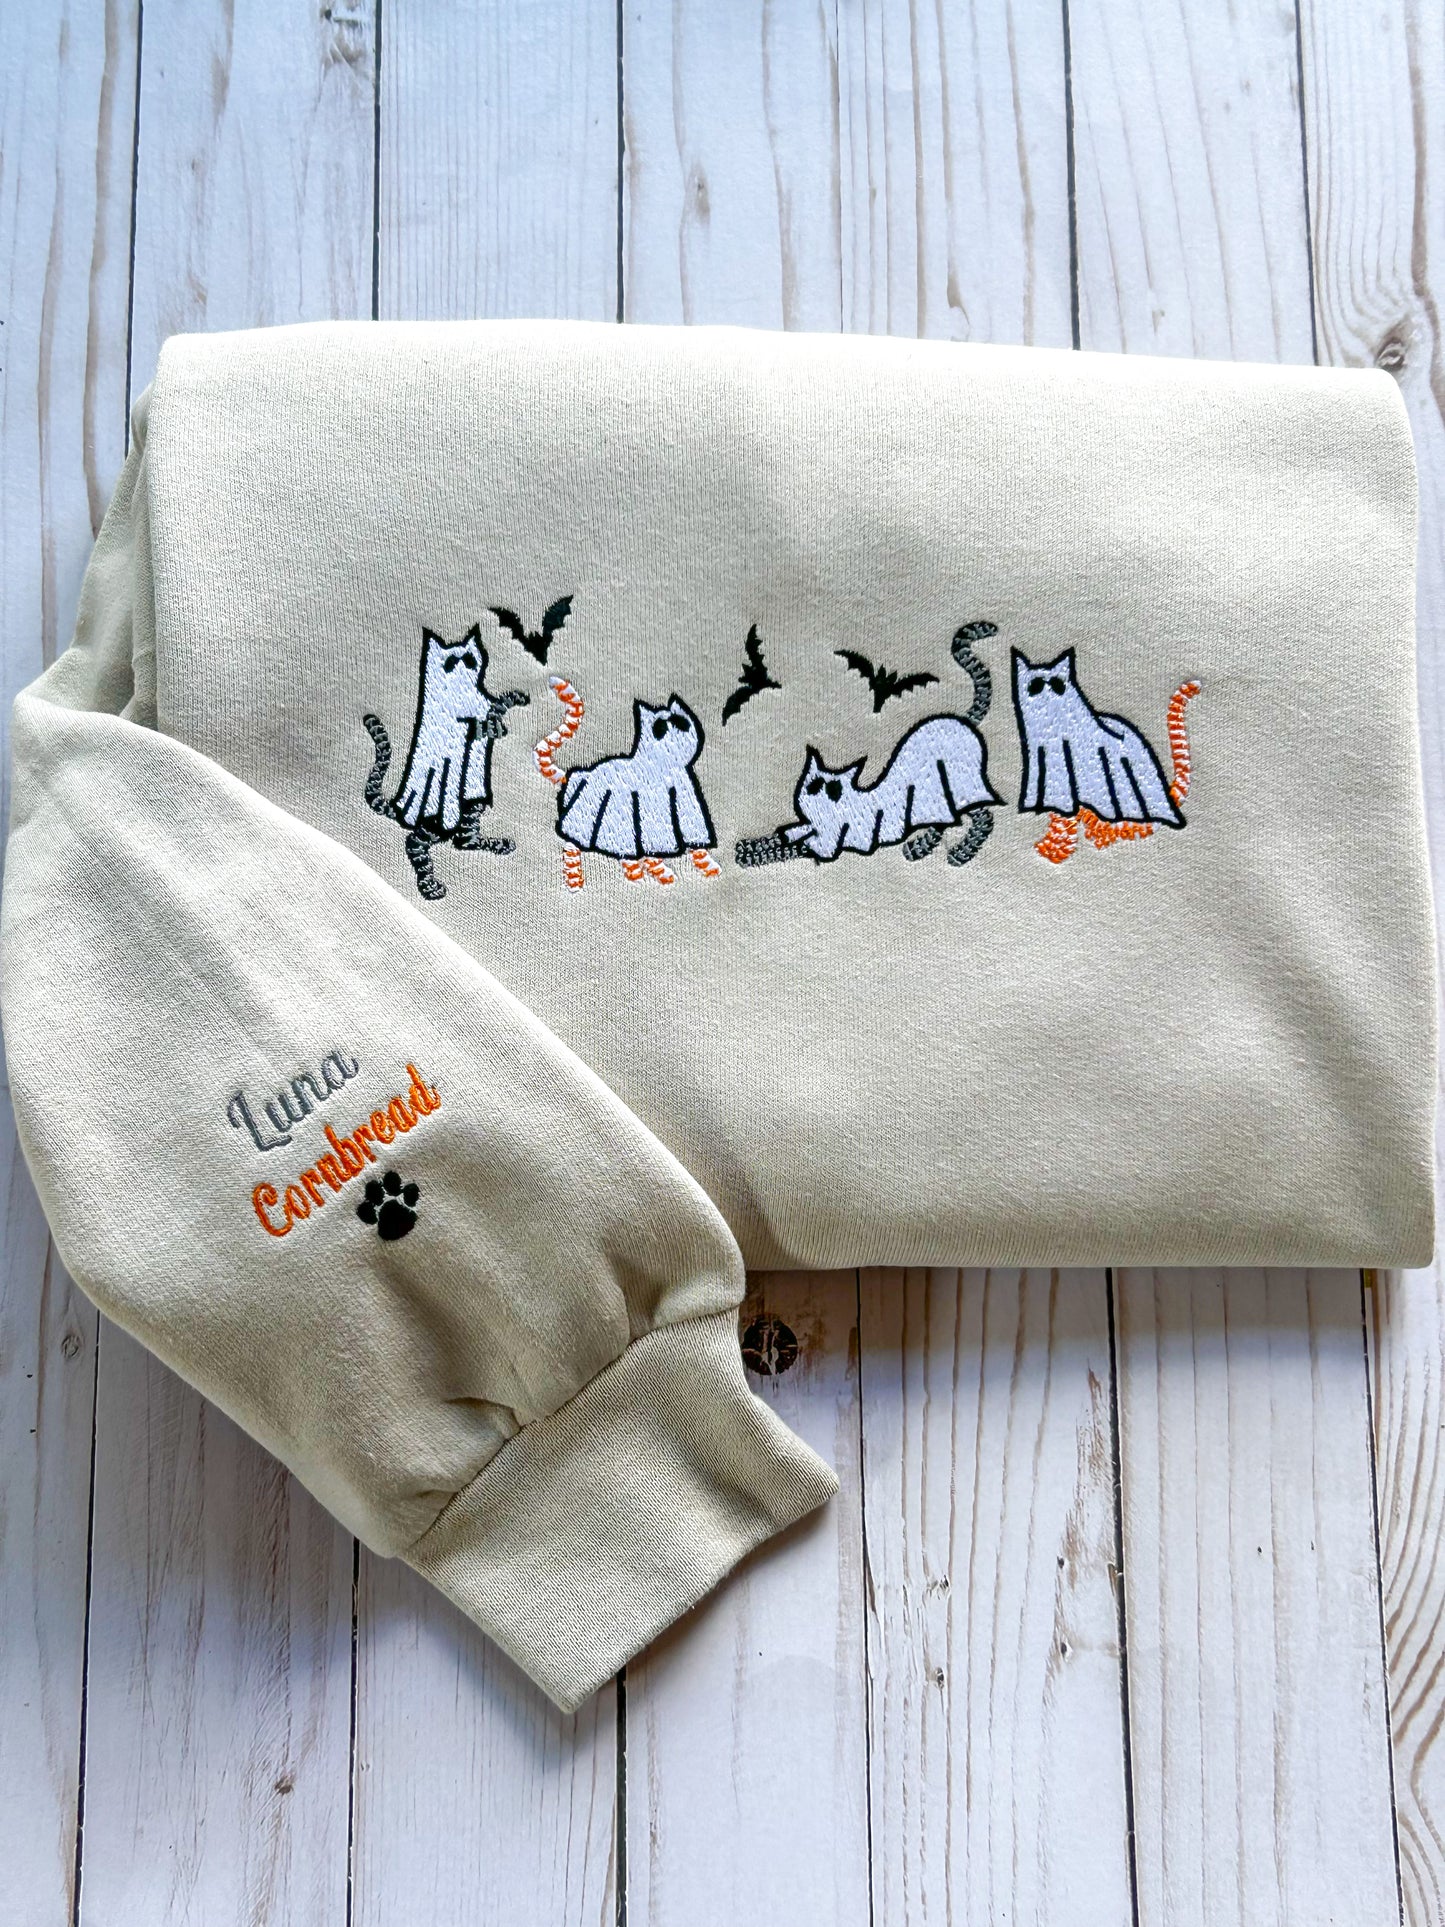 Ghost cat embroidered sweater, Grey and black striped cat and orange and white striped cat